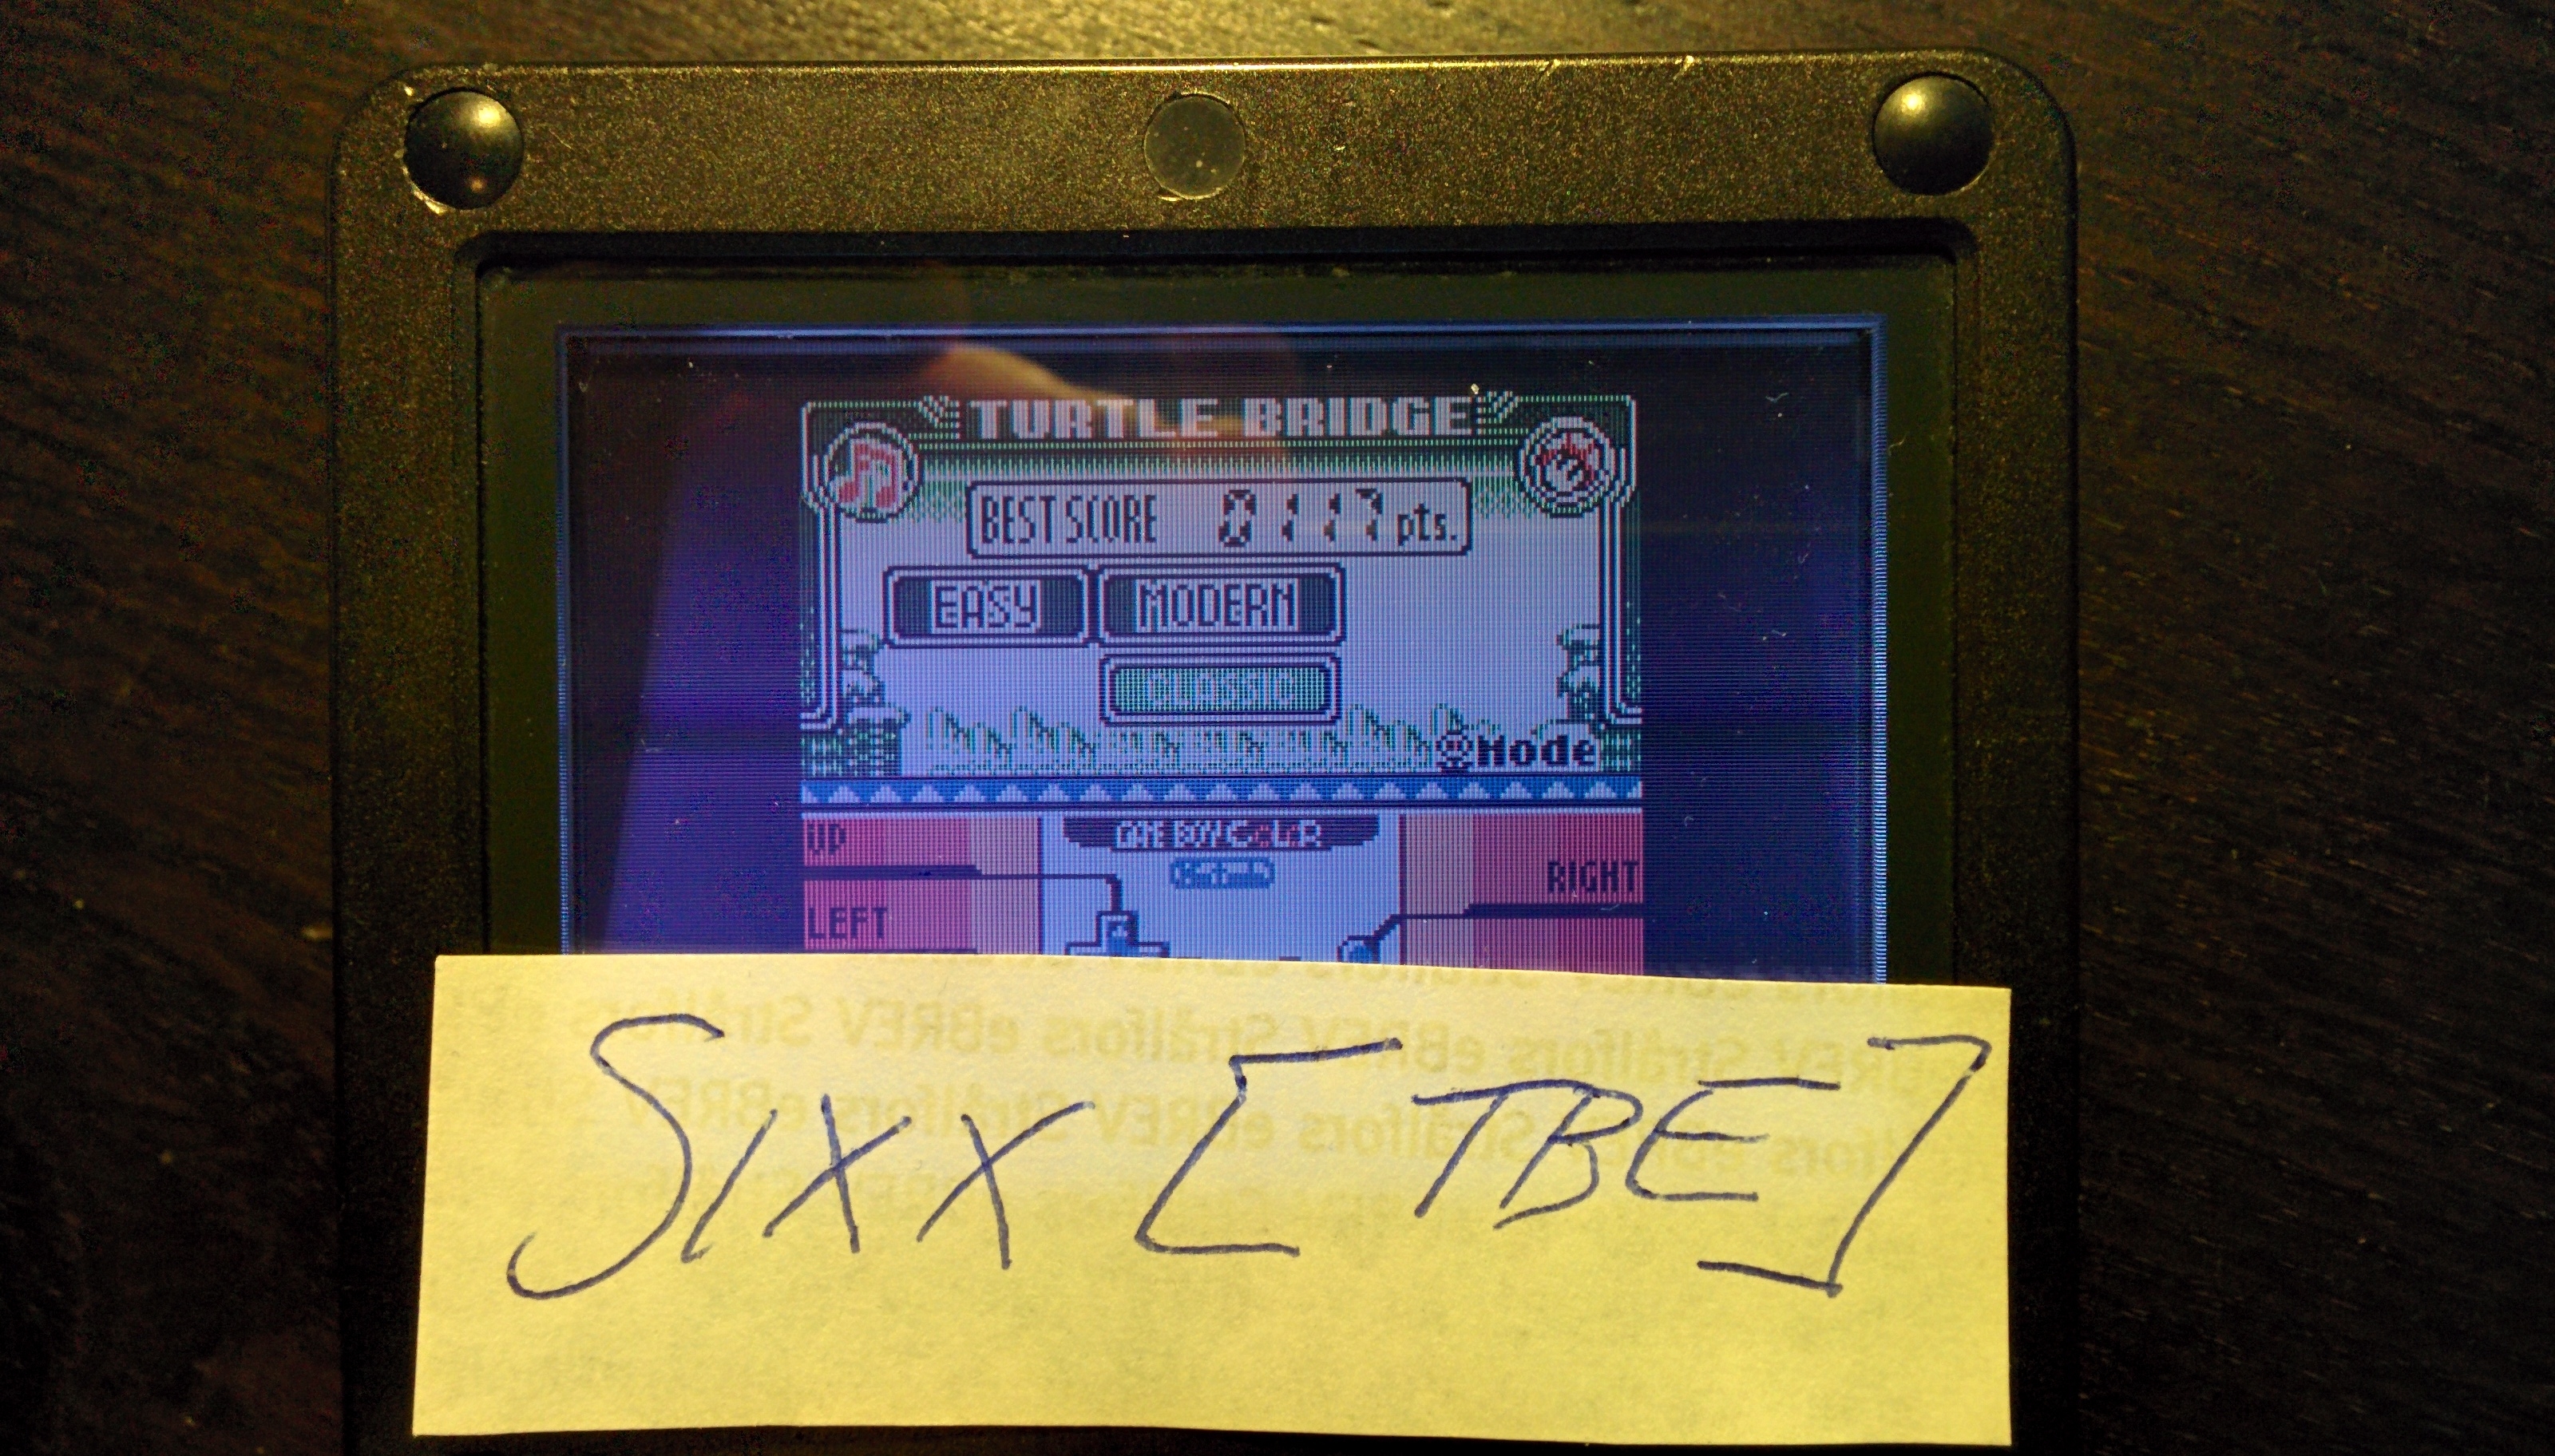 Sixx: Game & Watch Gallery 3: Turtle Bridge: Modern: Easy (Game Boy Color) 117 points on 2014-09-08 07:46:59